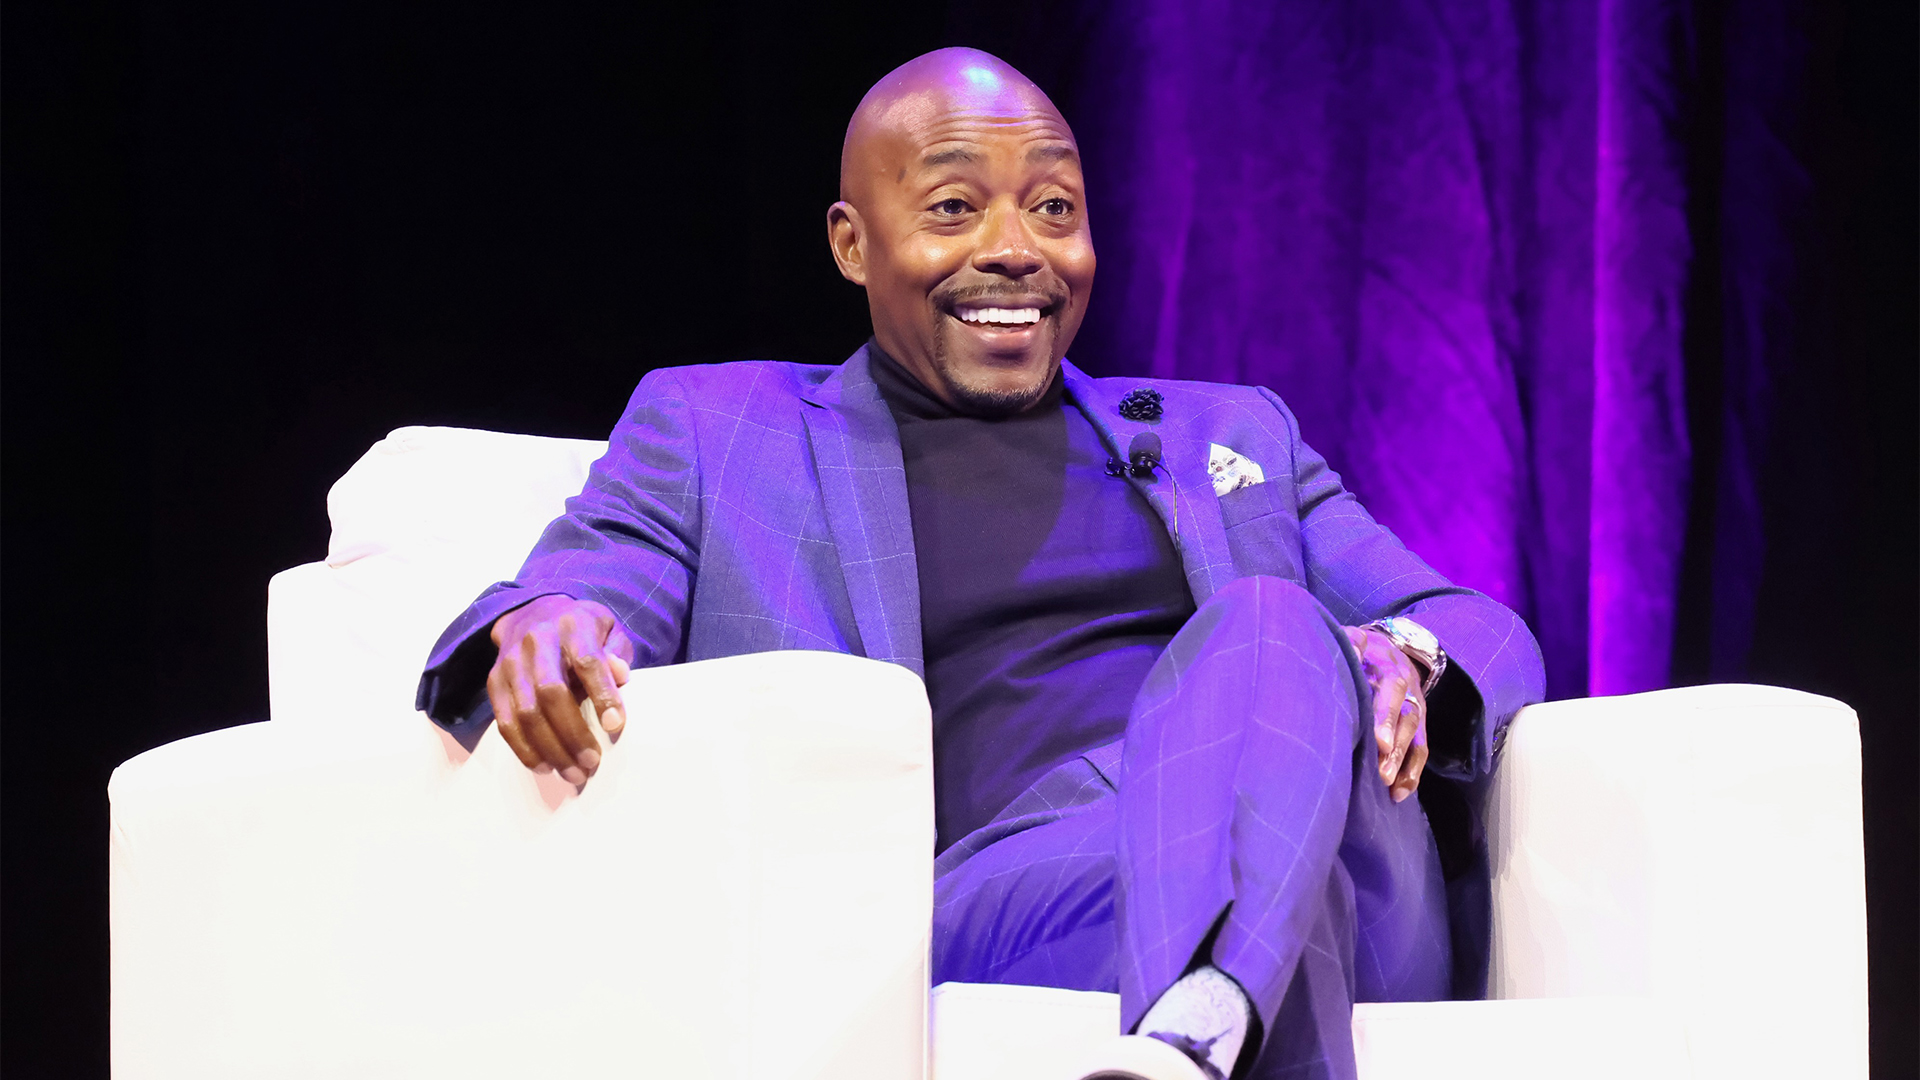 AFROTECH Conference 2023: Will Packer Talks Hustling His Way To A Billion-Dollar Portfolio Without Support From Hollywood